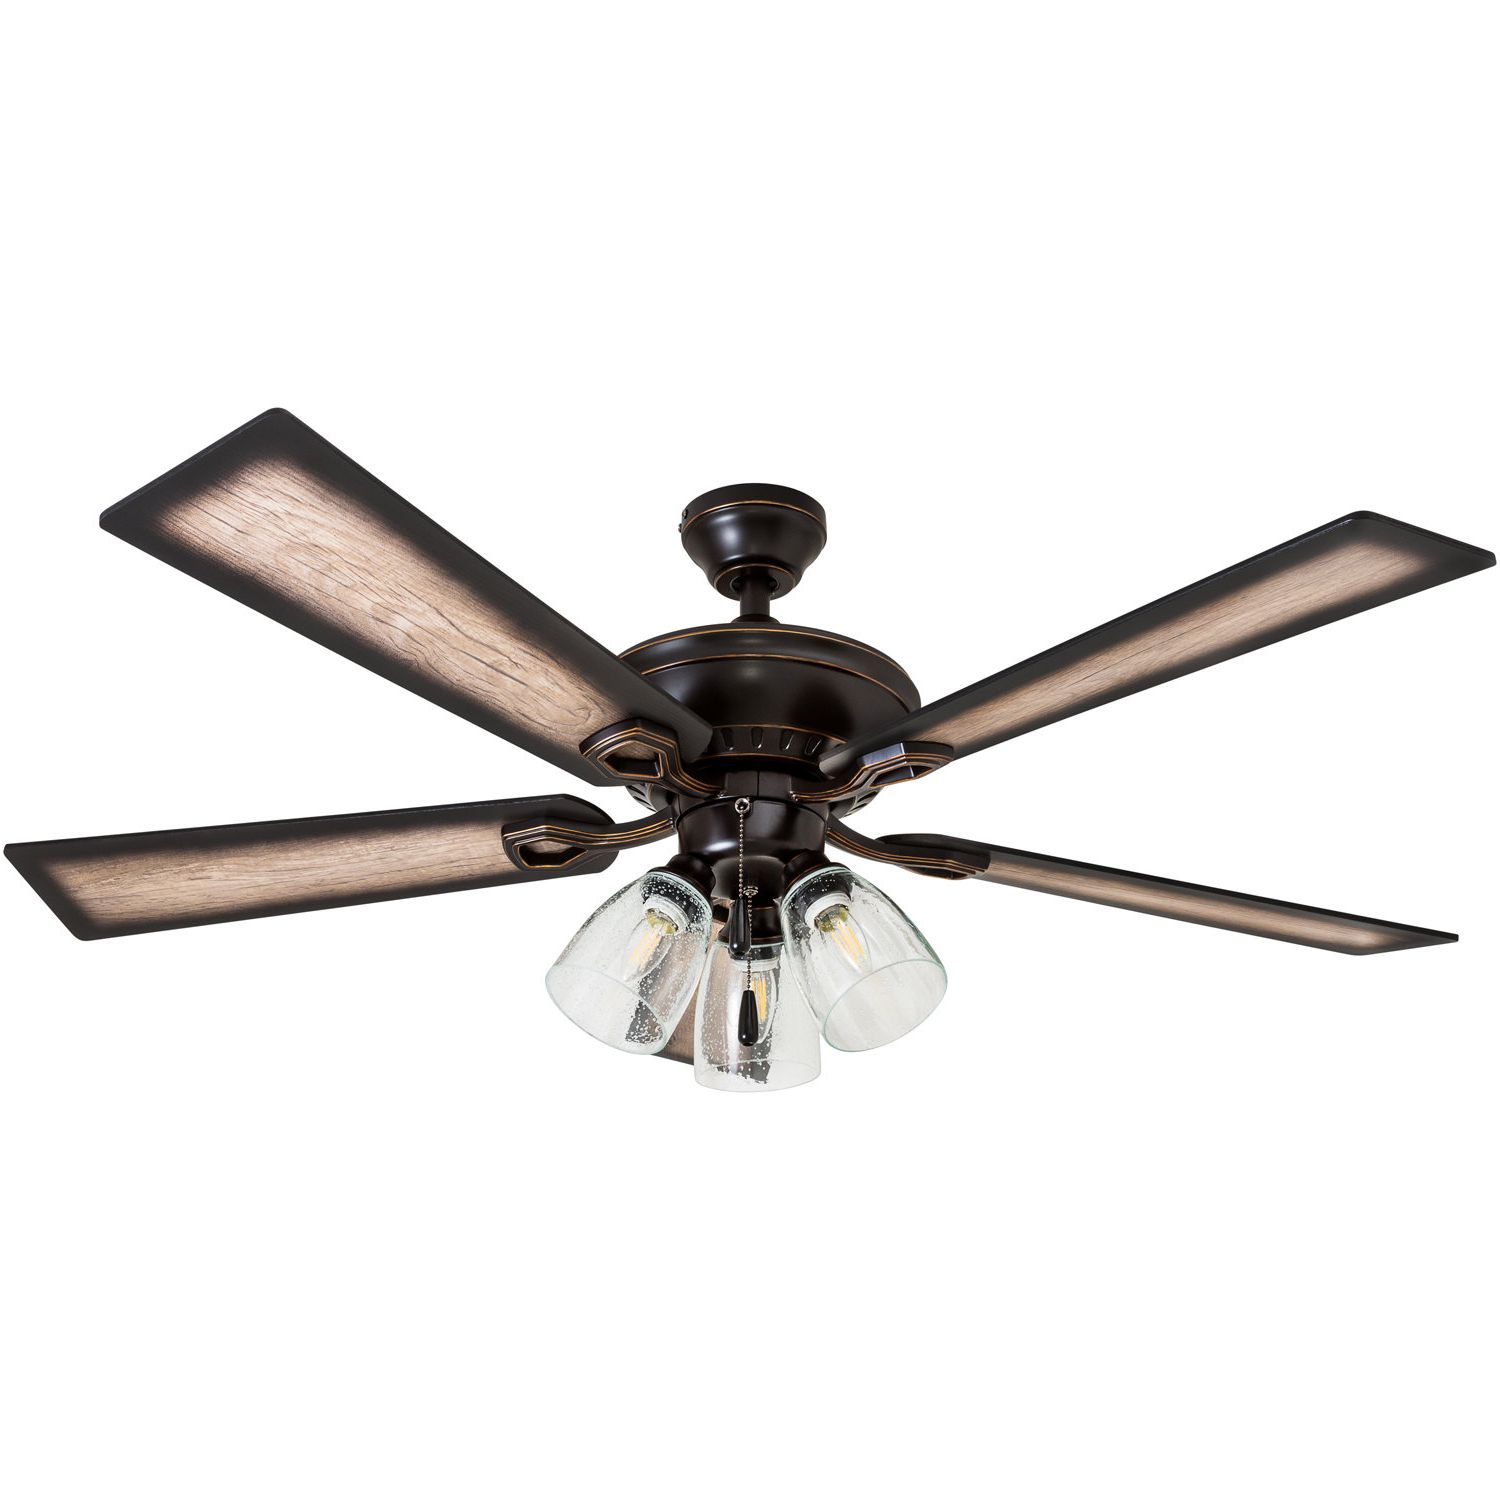 52" O'hanlon 5 Blade Led Ceiling Fan, Light Kit Included With Regard To Well Known Donegan 5 Blade Led Ceiling Fans (View 11 of 20)